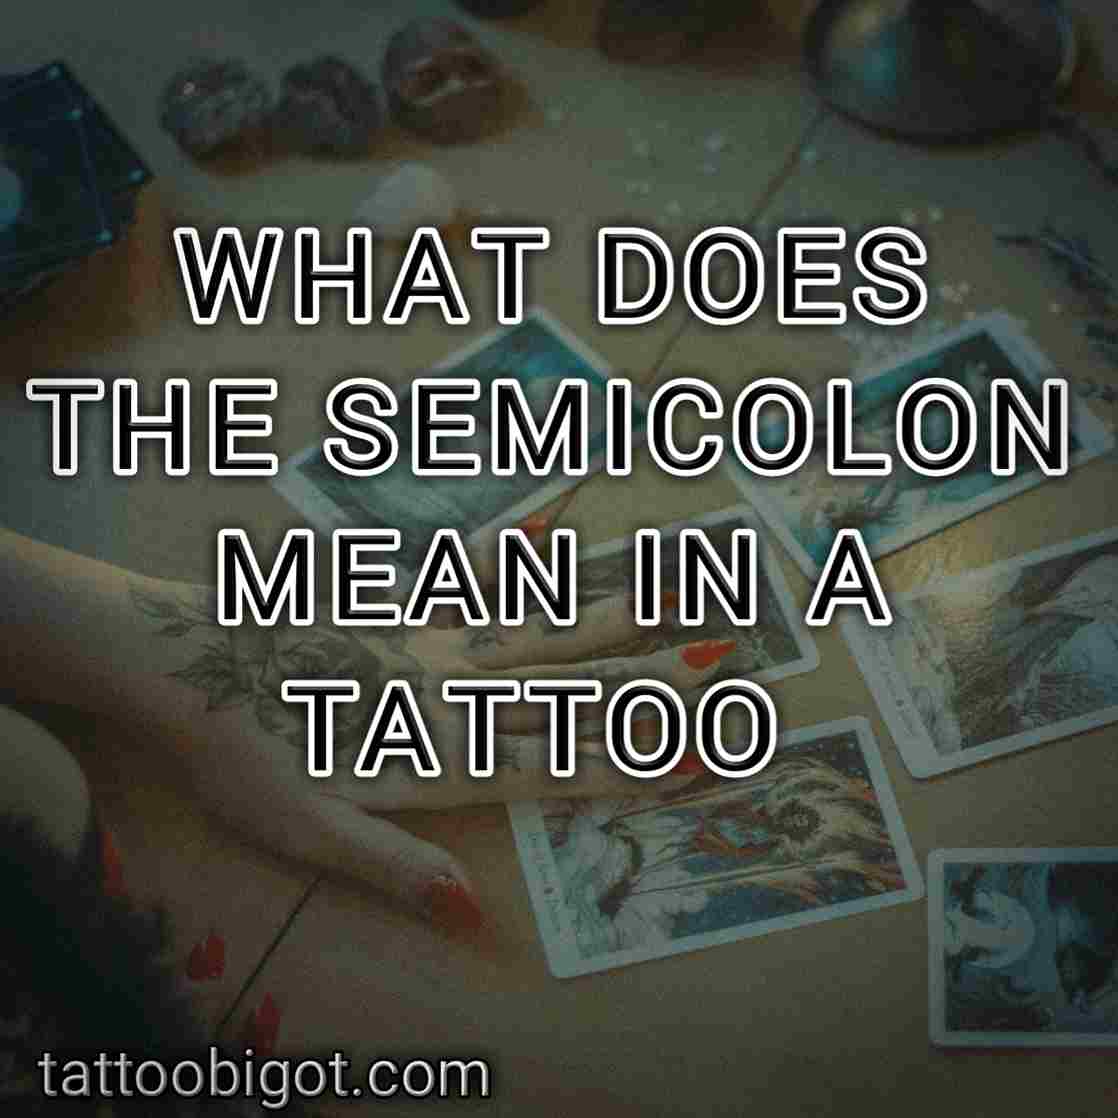 What does the semicolon mean in a tattoo